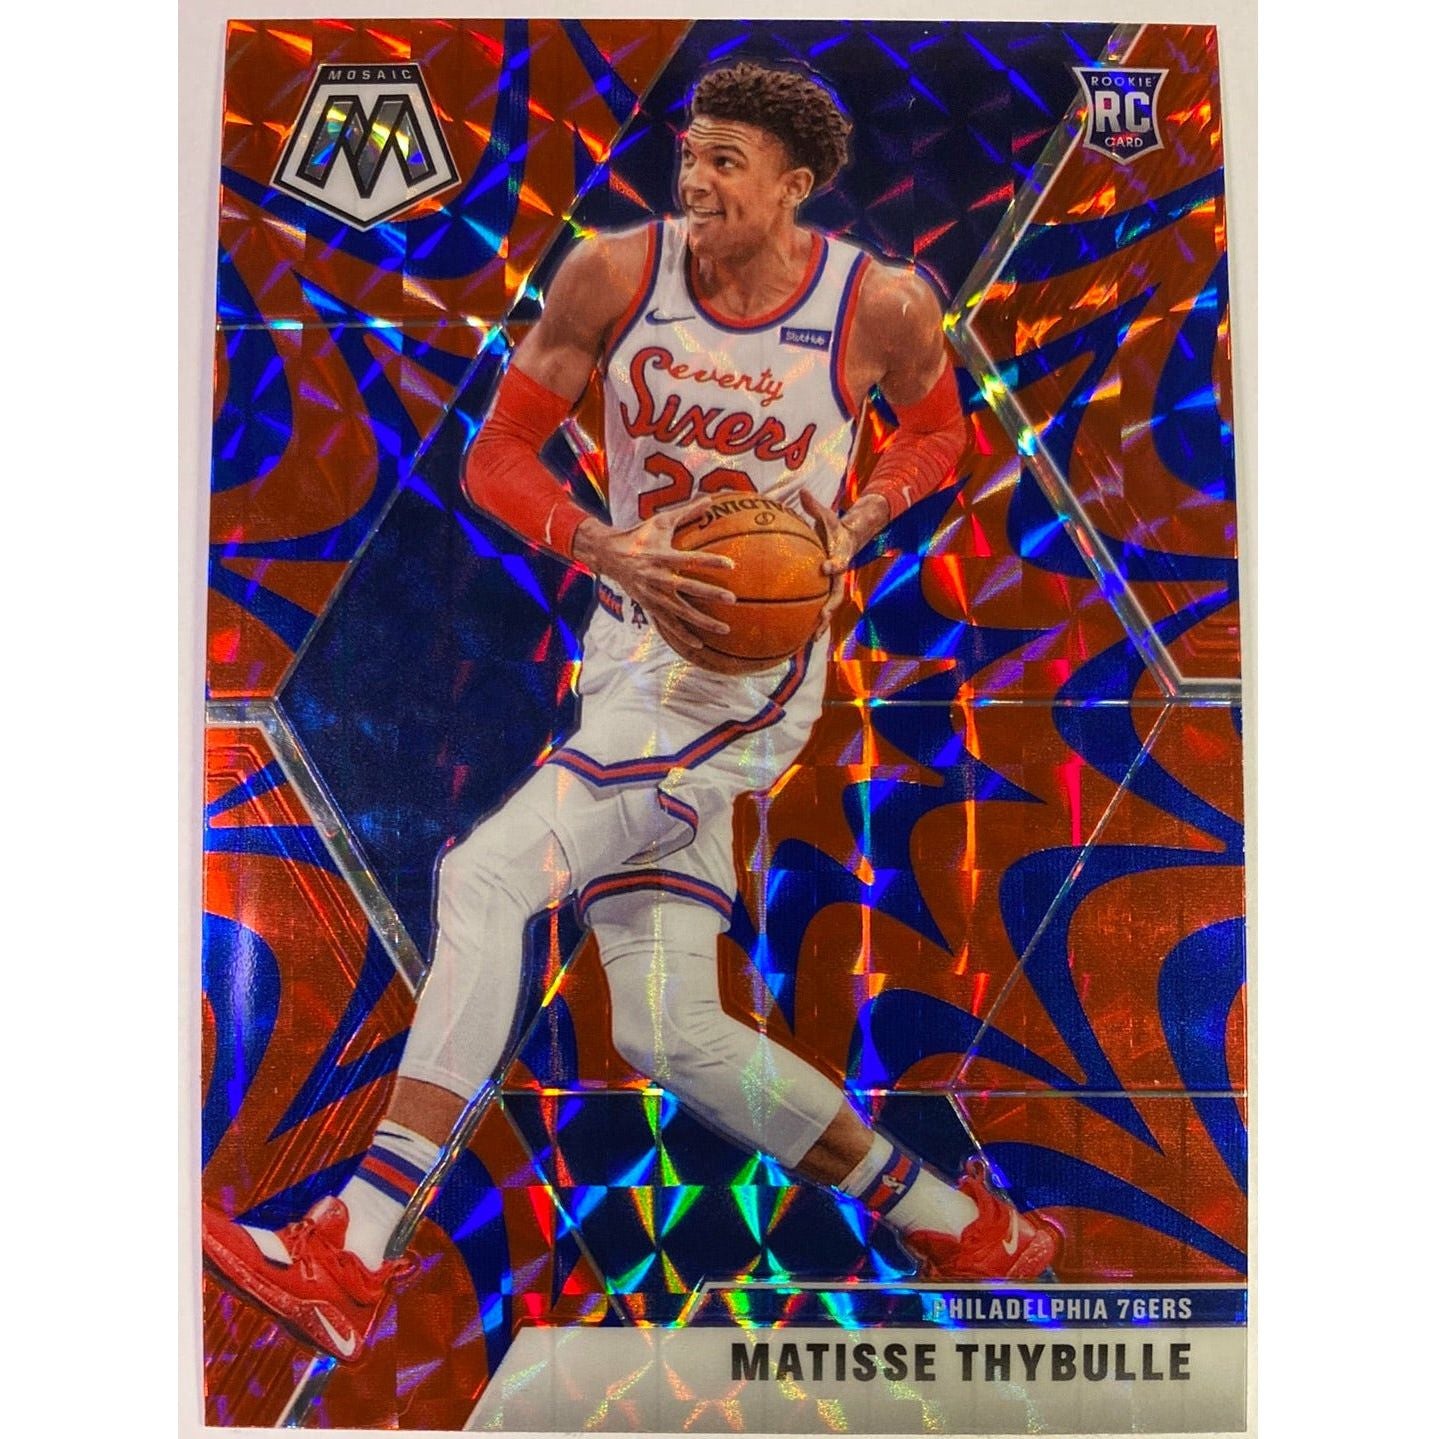  2019-20 Mosaic Matisse Thybulle Blue Reactive Prizm RC  Local Legends Cards & Collectibles